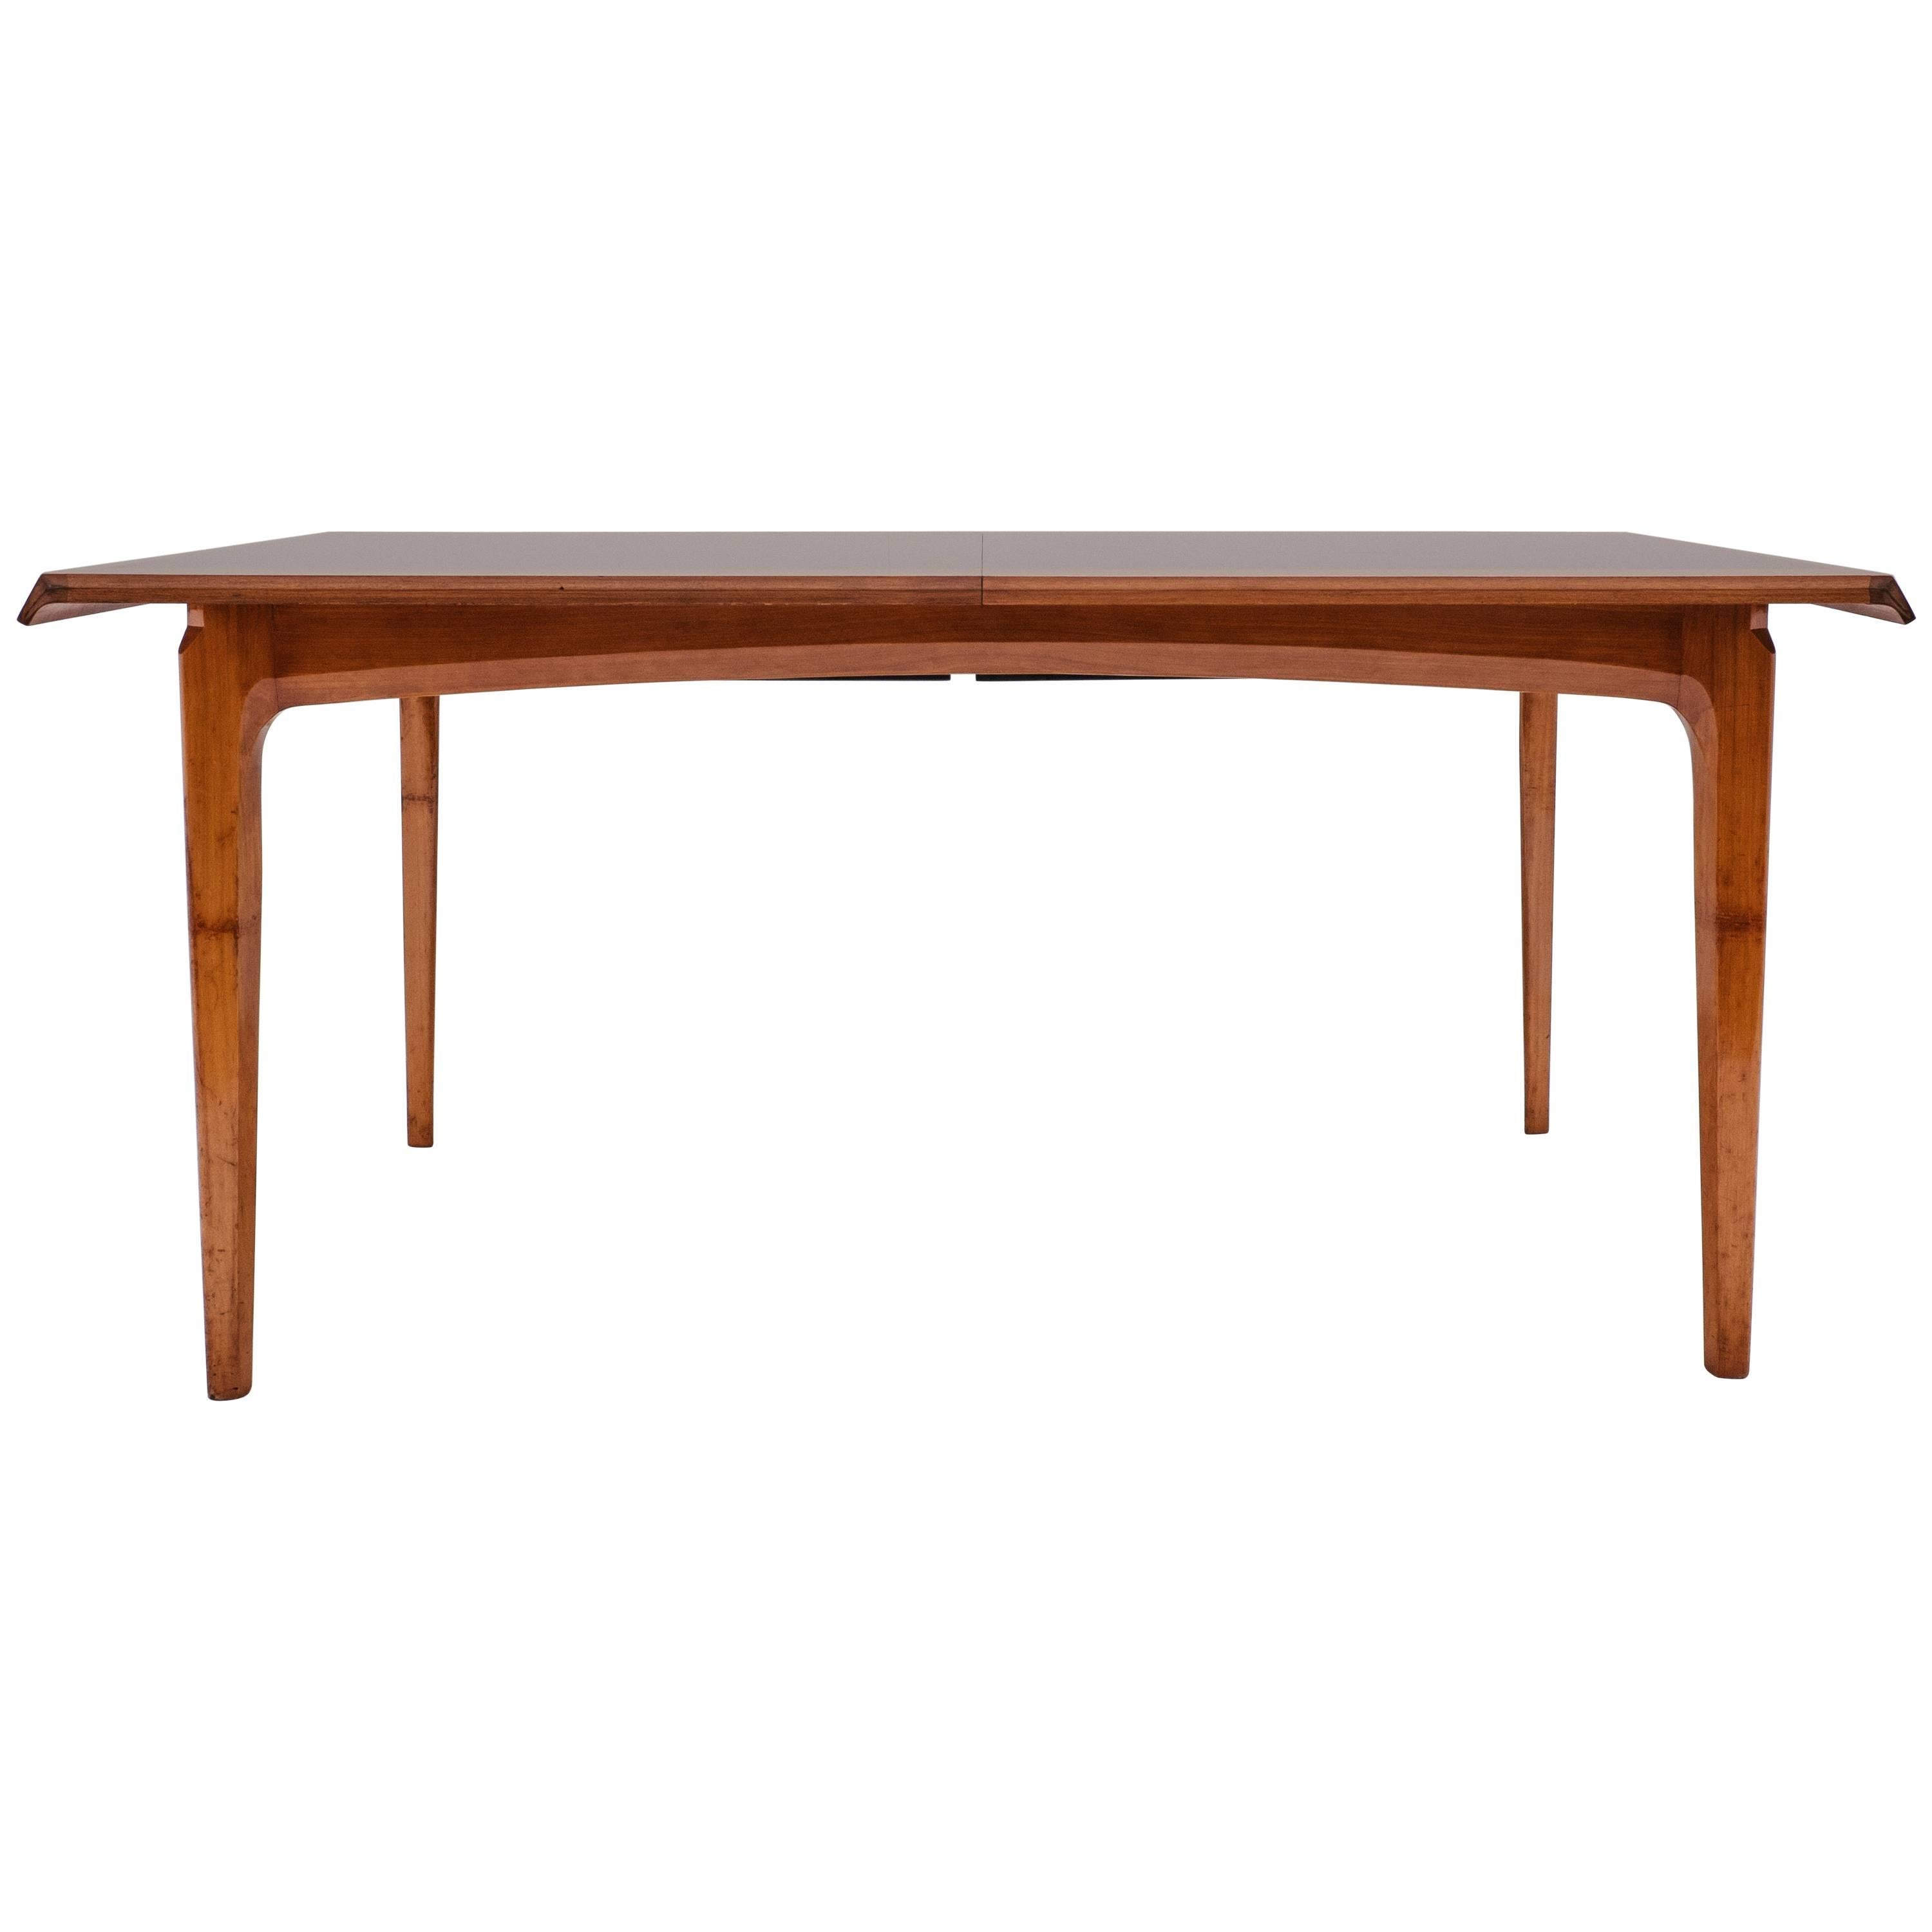 Rare and Exclusive 1962 "Dt 8" Madison Dining Table by Fred Sandra for De Coene For Sale